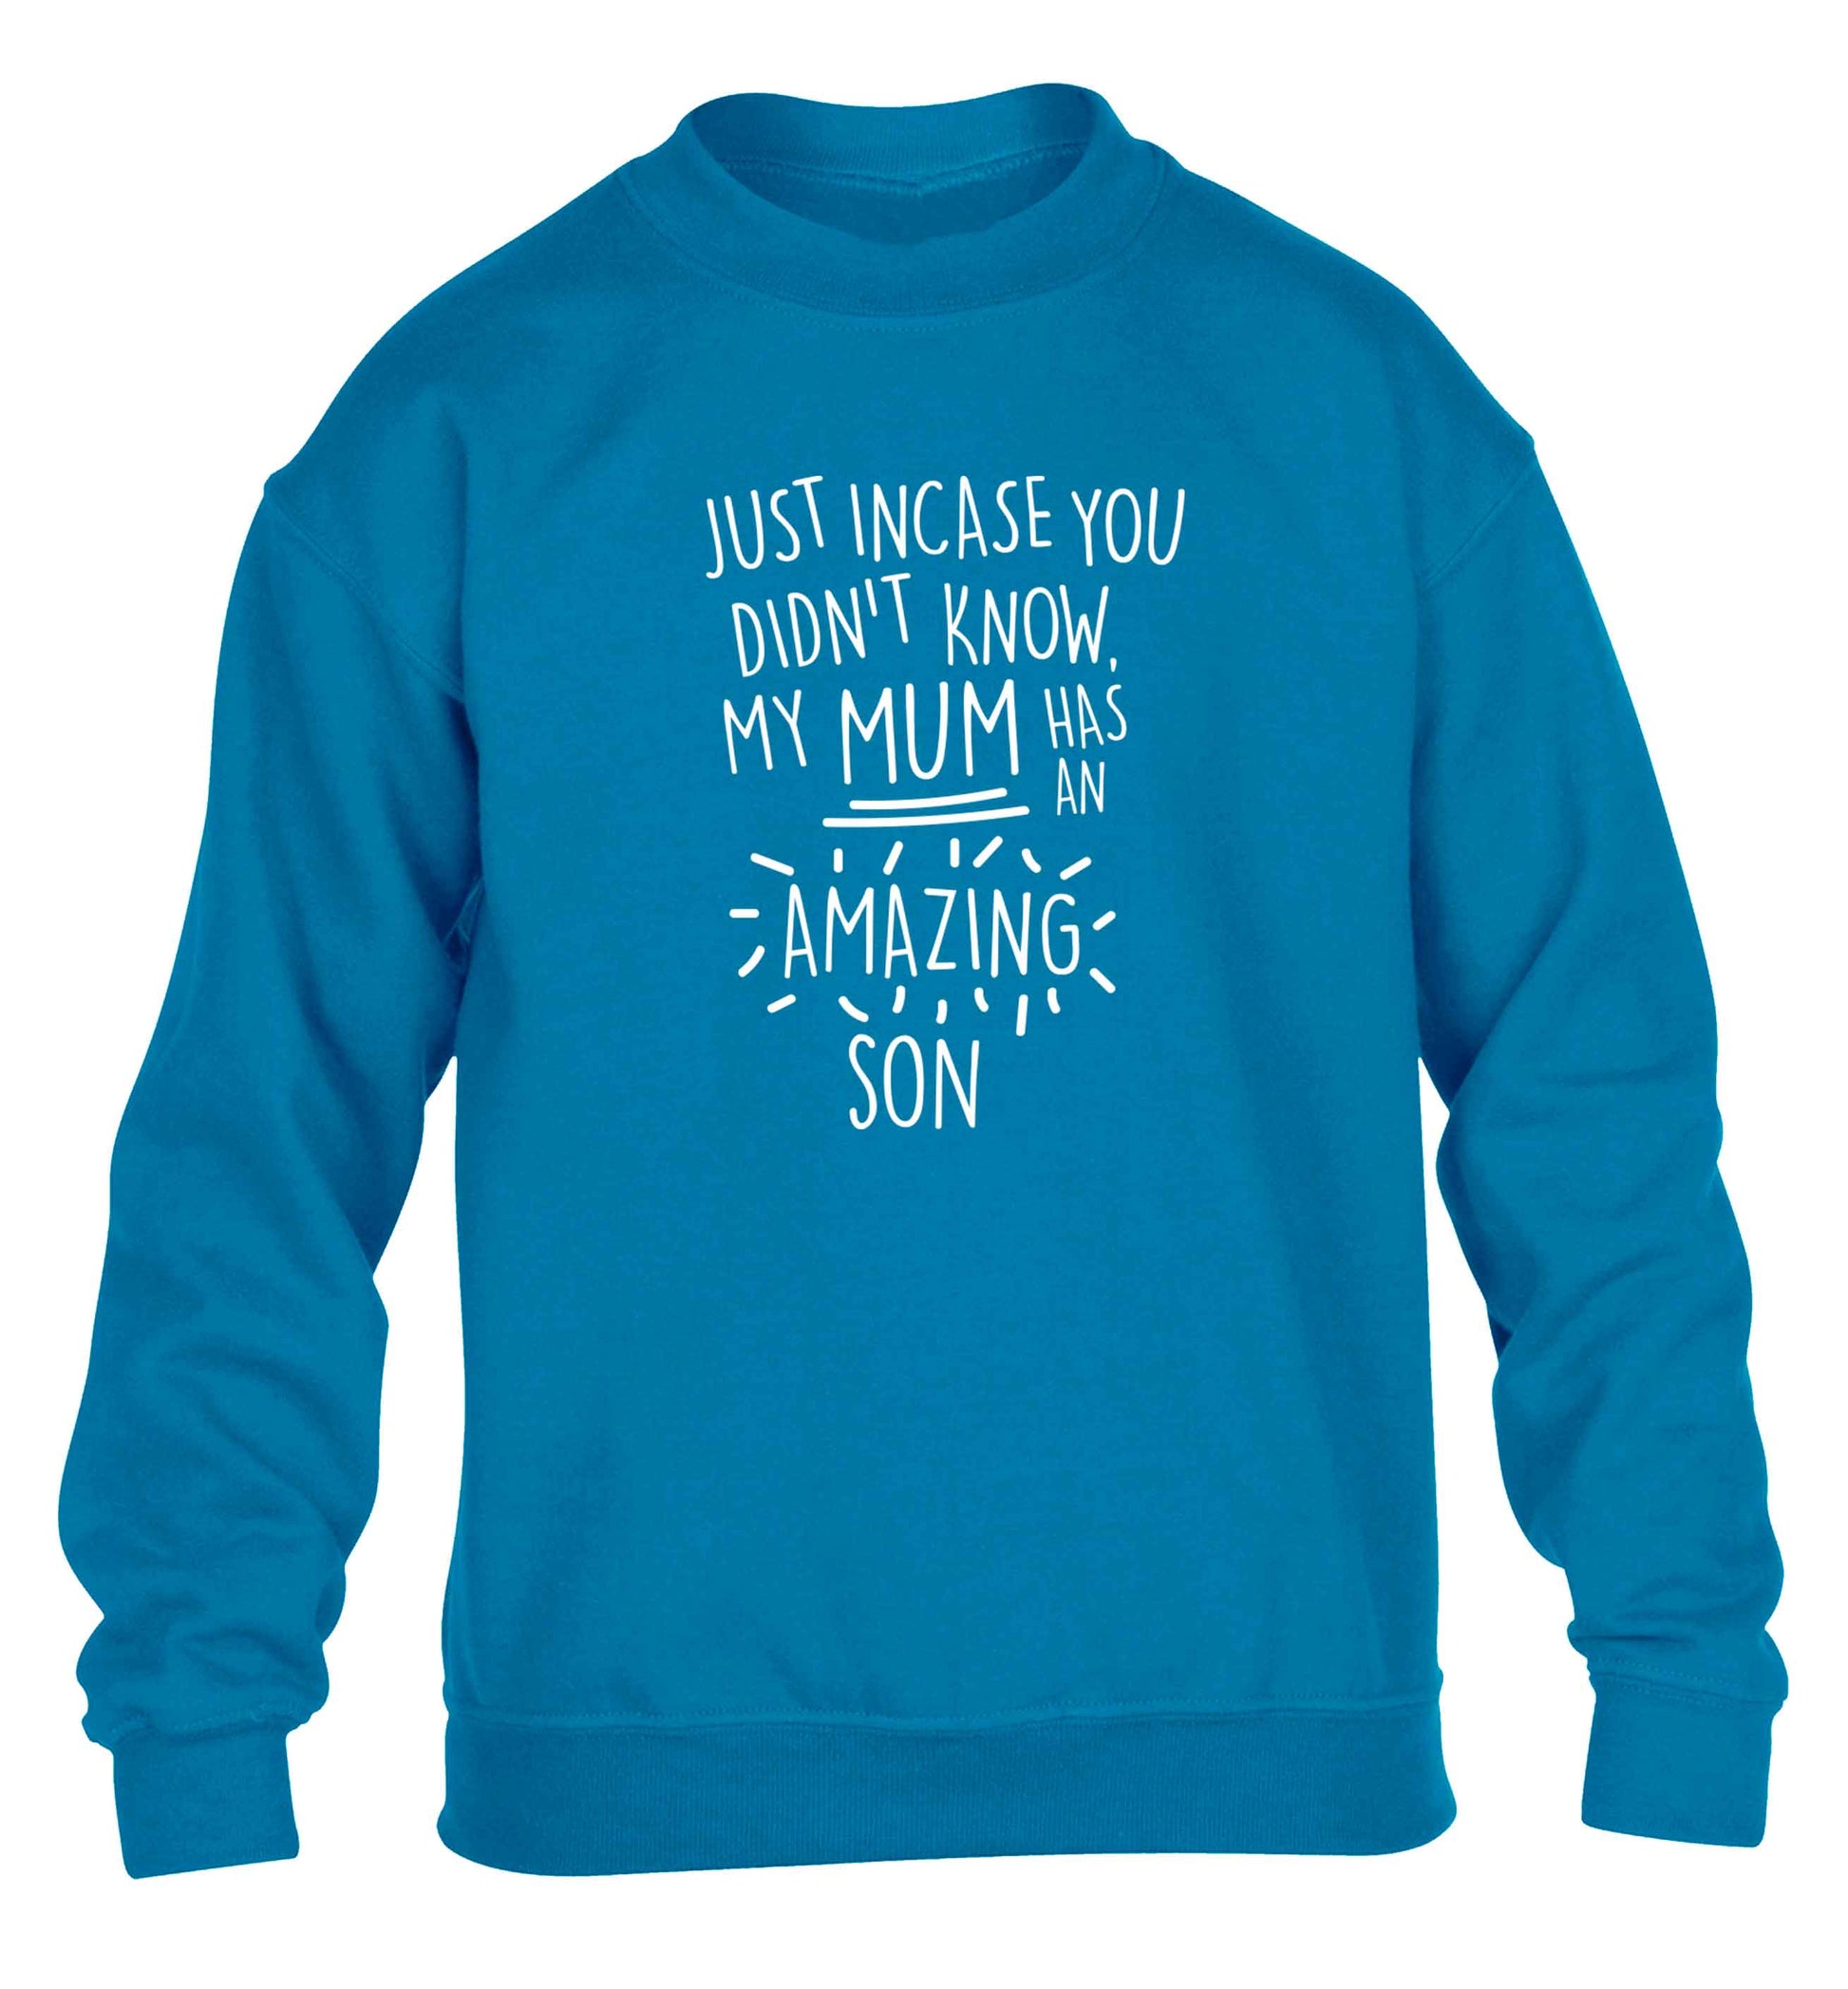 Just incase you didn't know my mum has an amazing son children's blue sweater 12-13 Years